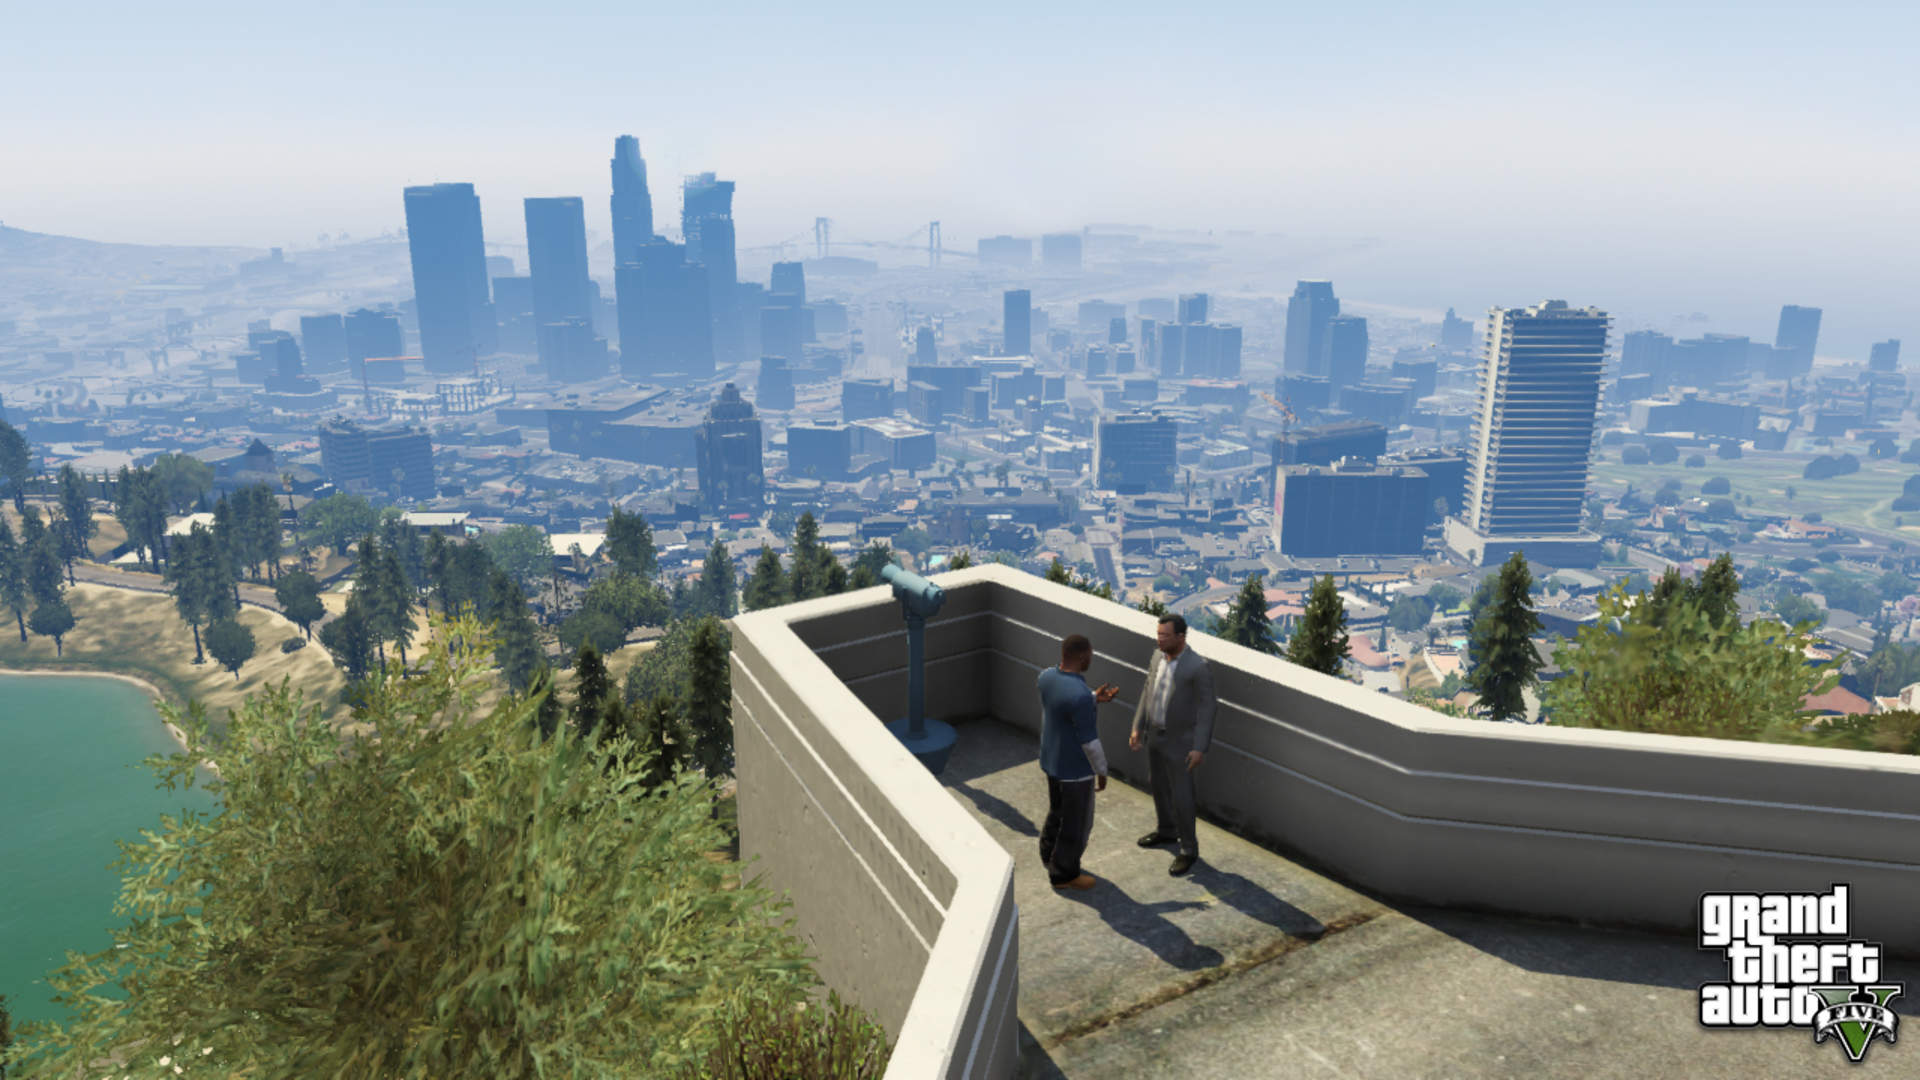 Grand Theft Auto V screenshot looking over the city